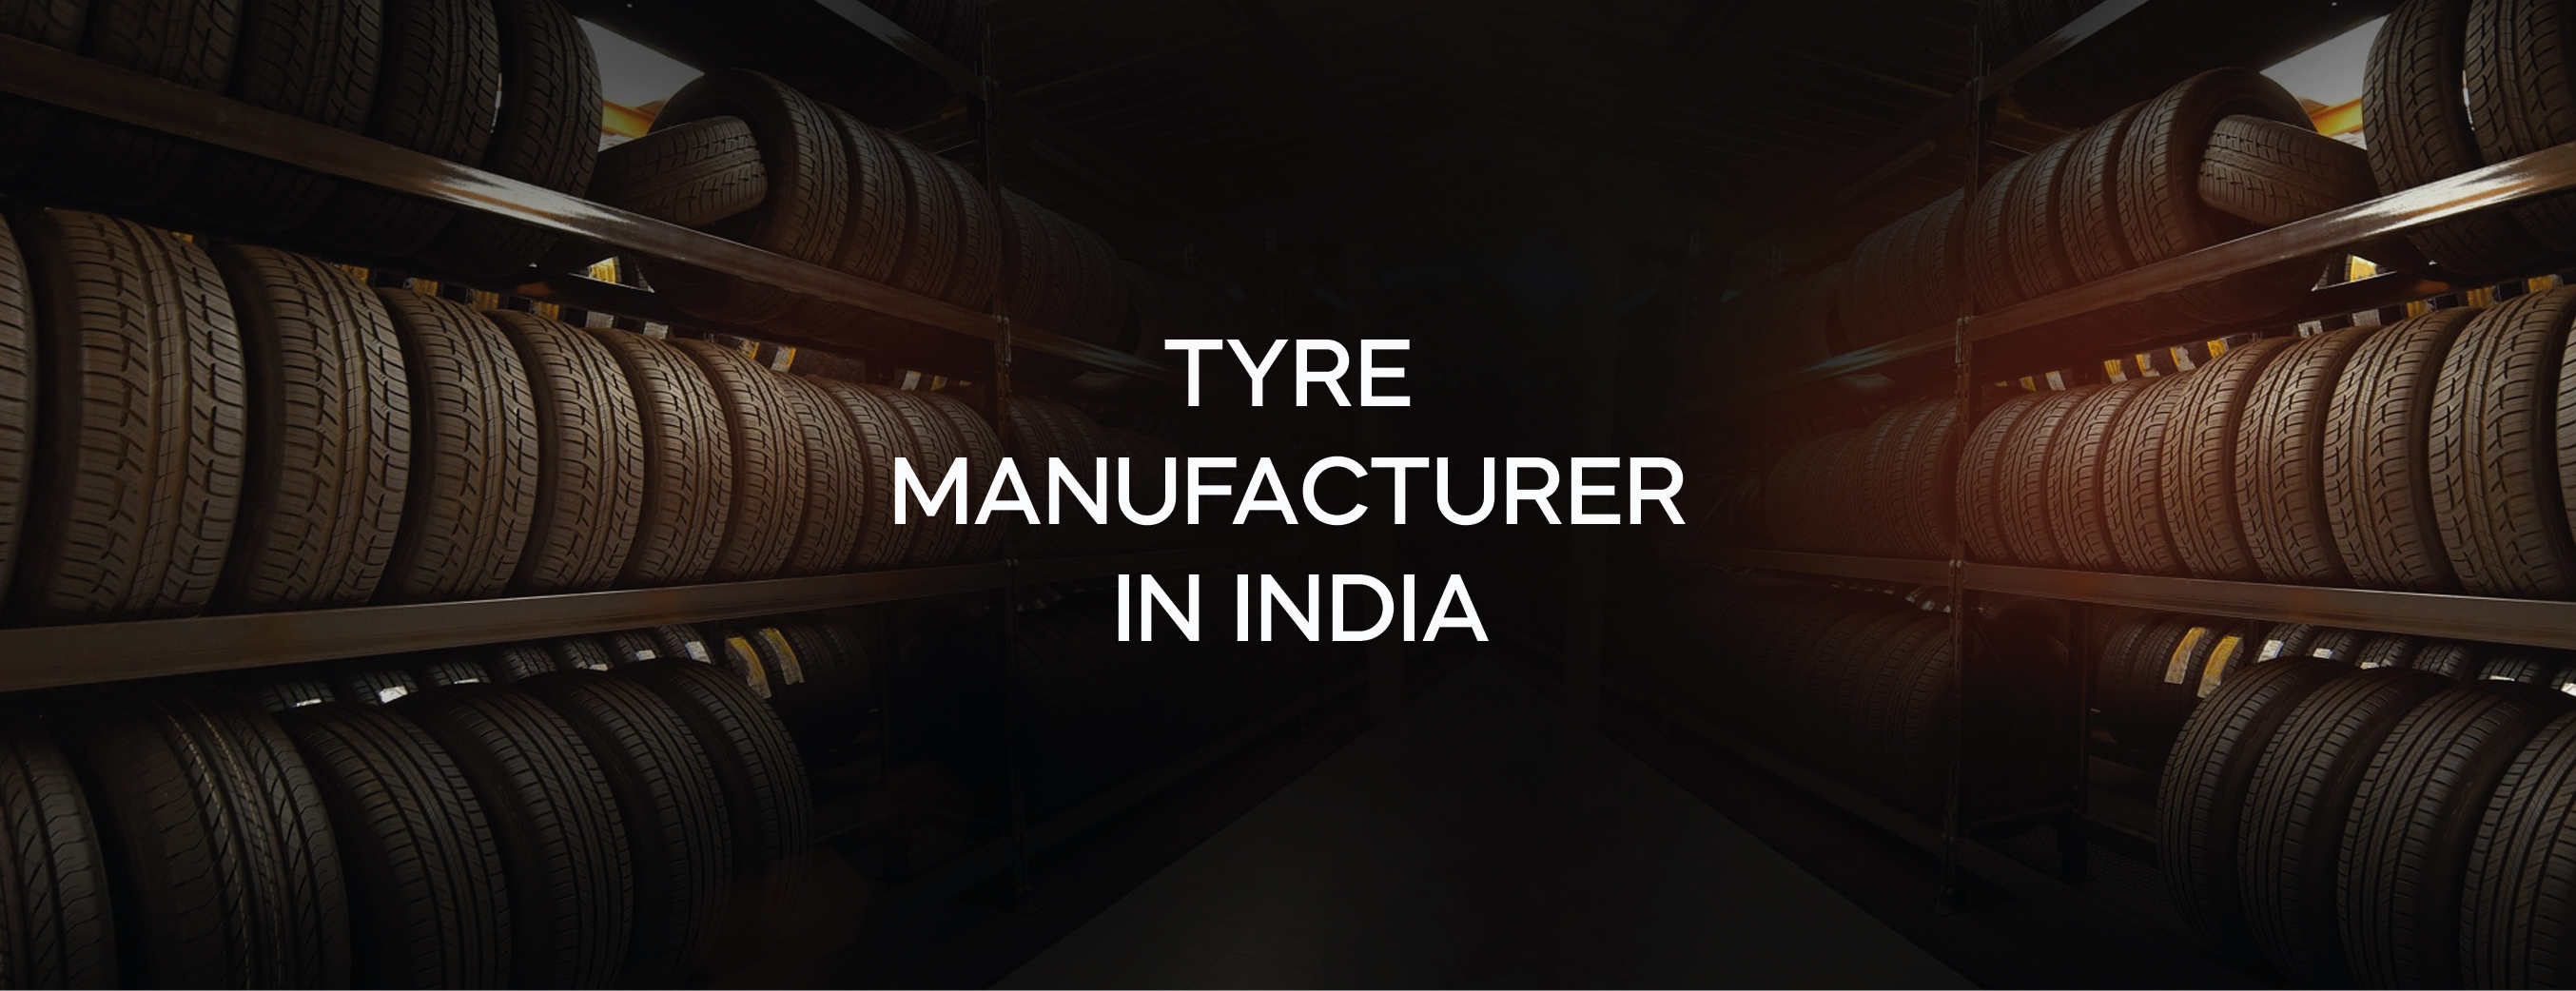 tyre manufacturers in India 